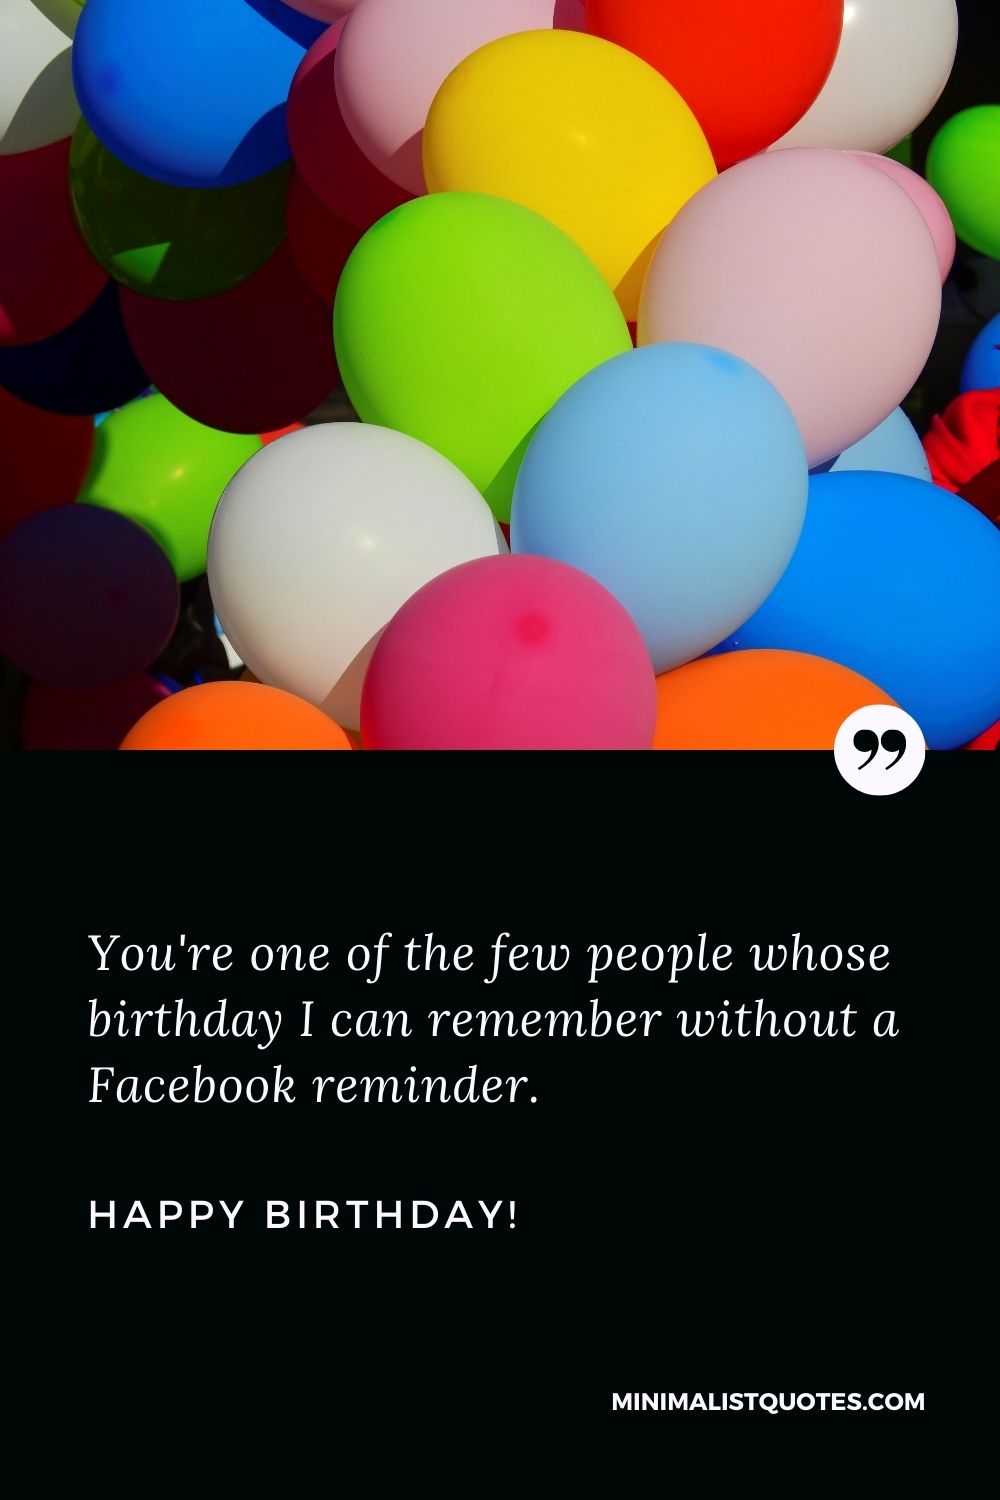 105 Short & Simple Birthday Wishes for the Minimalist in You - YourFates